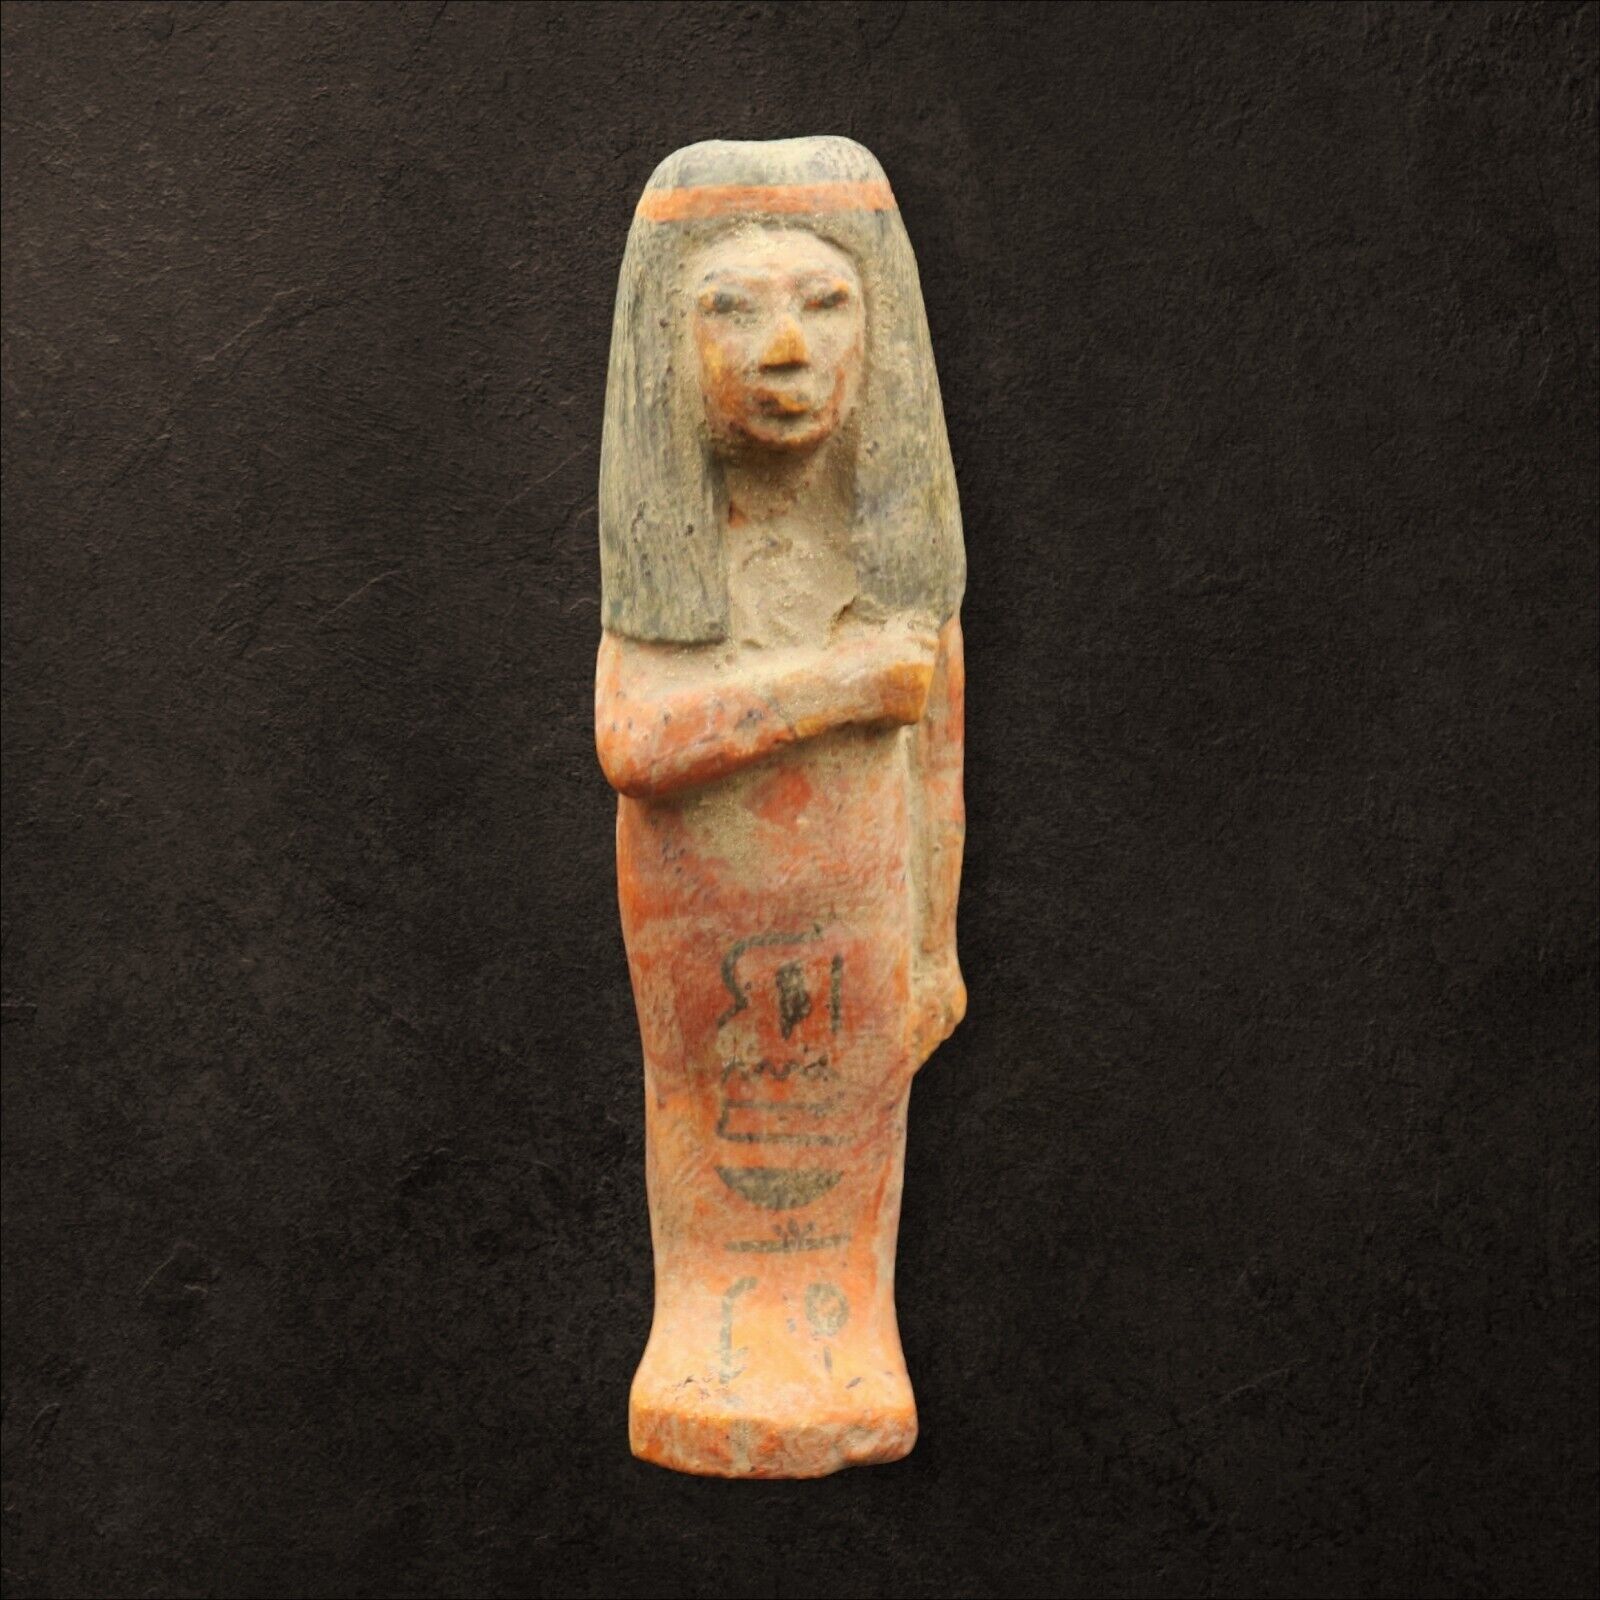 Very RARE Antique Wooden Statue of Ancient Egyptian Funerary Servant Ushabti